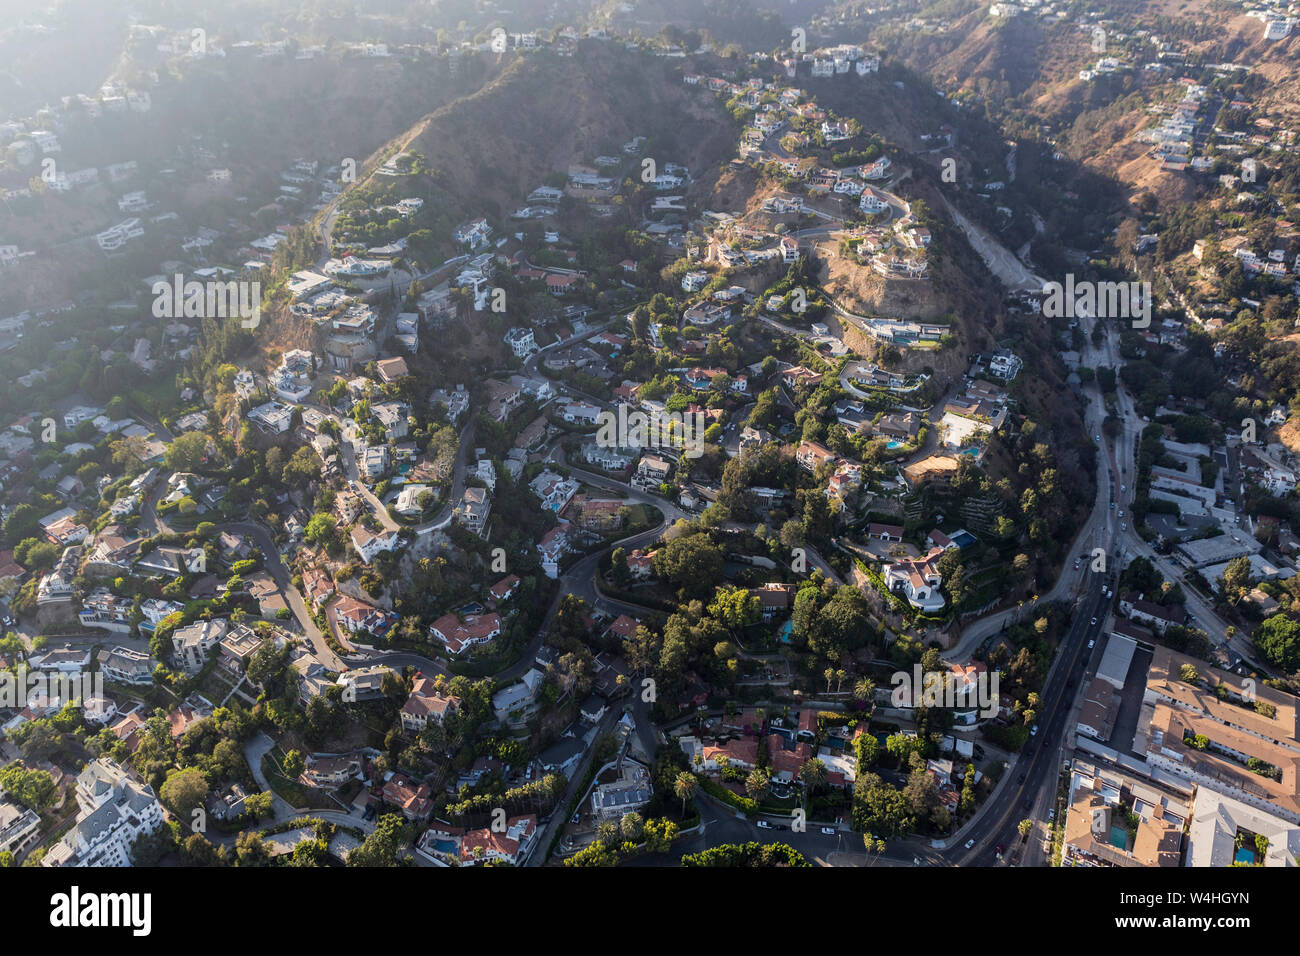 Laurel canyon hi-res stock photography and images - Alamy